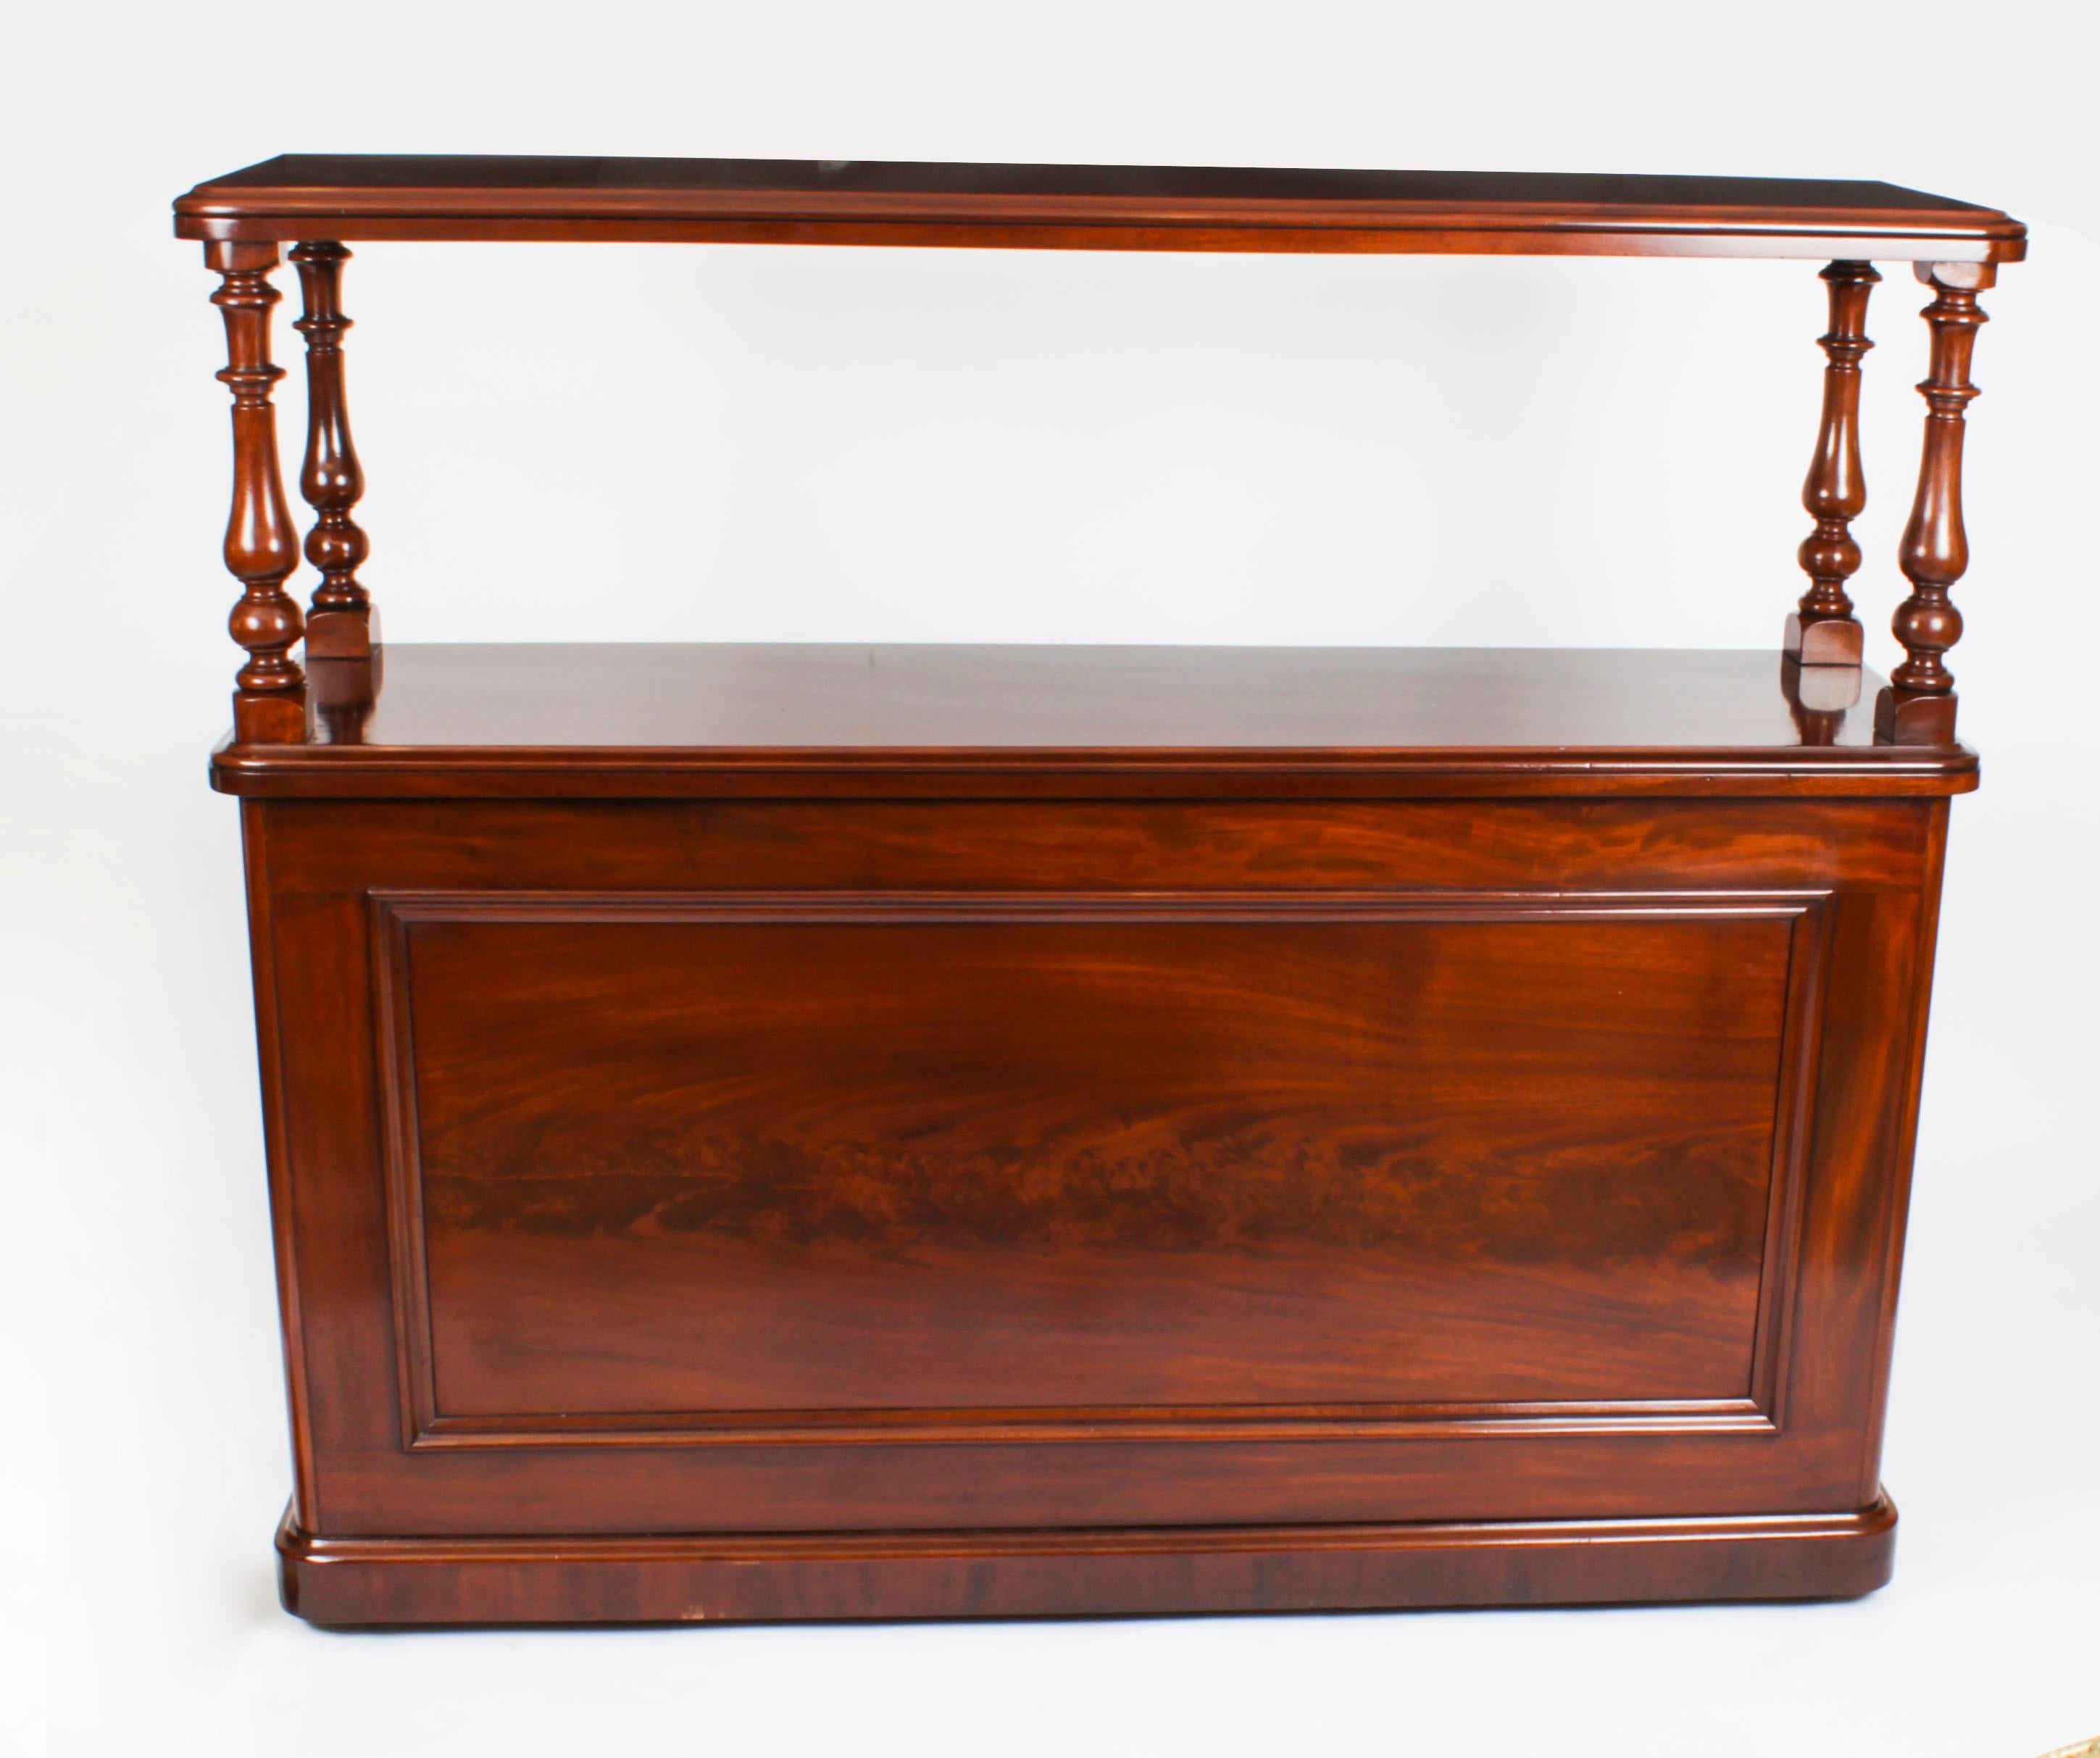 This is a fantastic English Victorian flame mahogany bar Circa 1870 in date.

The botanical name for the mahogany this bar is made of is Swietenia Macrophylla, and this type of mahogany is not subject to cites regulation.

The 'rectangular